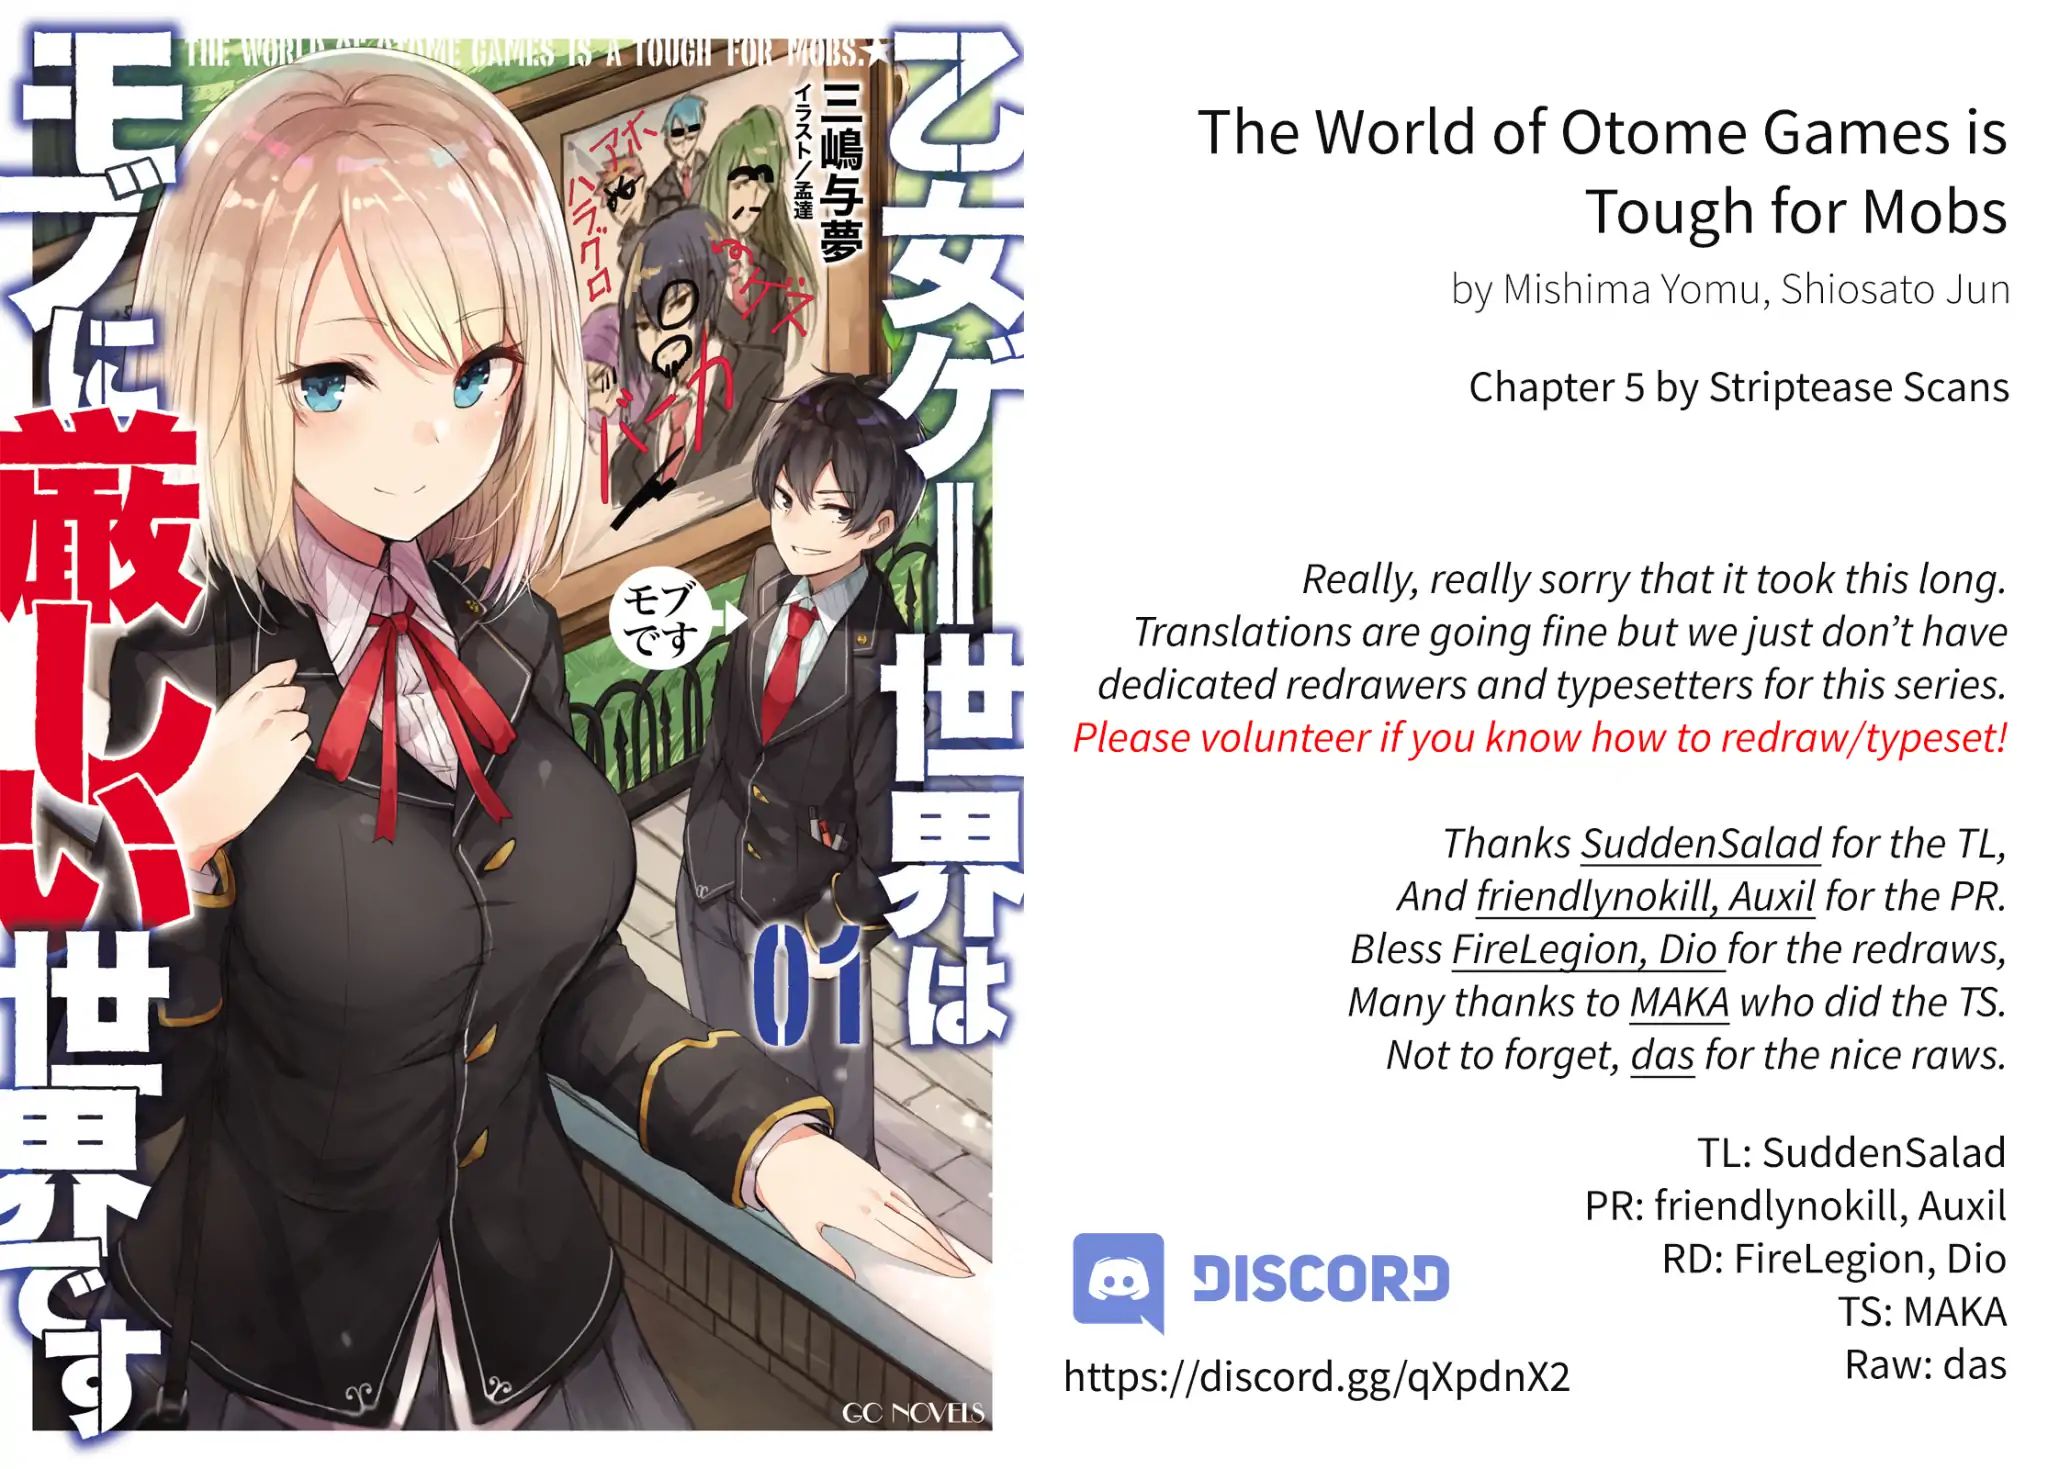 The World of Otome Games is Tough for Mobs Chapter 5: The Normal. Then The Abnormal.